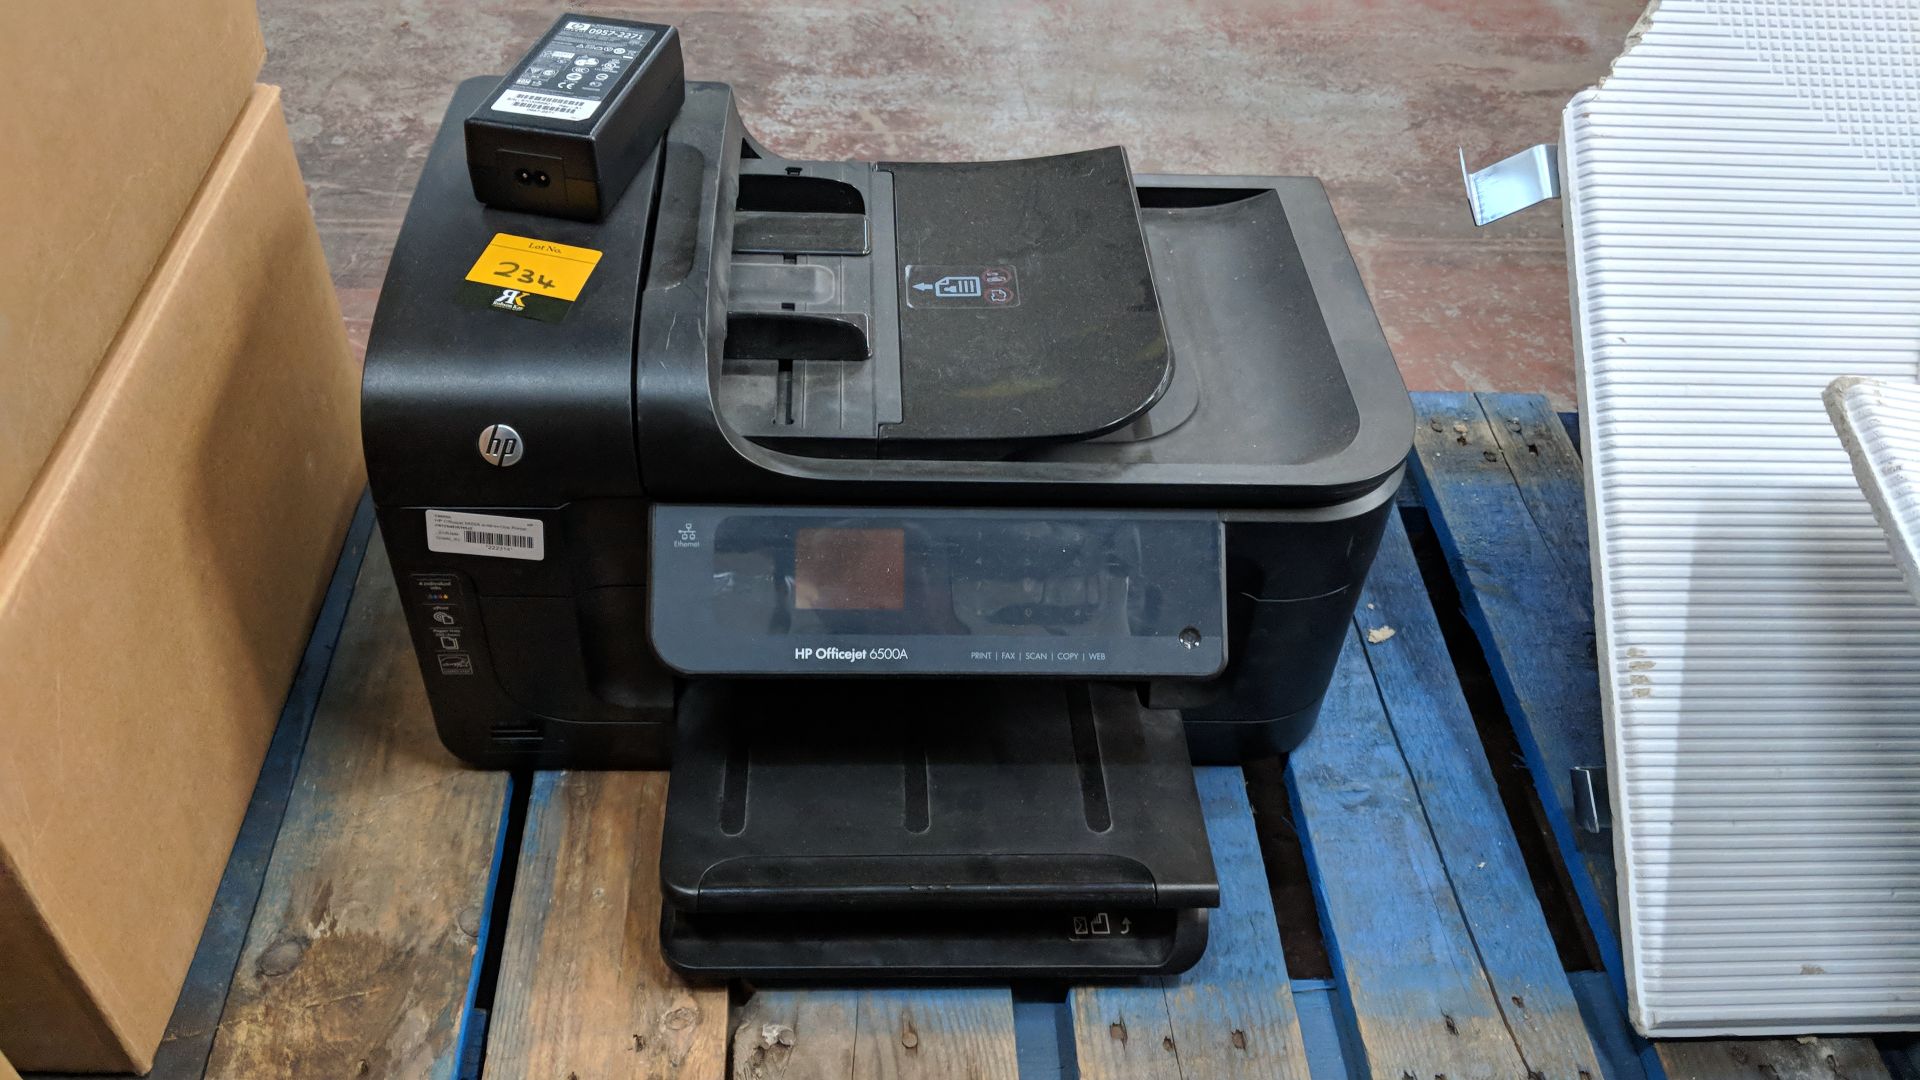 HP OfficeJet 6500A multifunction printer IMPORTANT: Please remember goods successfully bid upon must